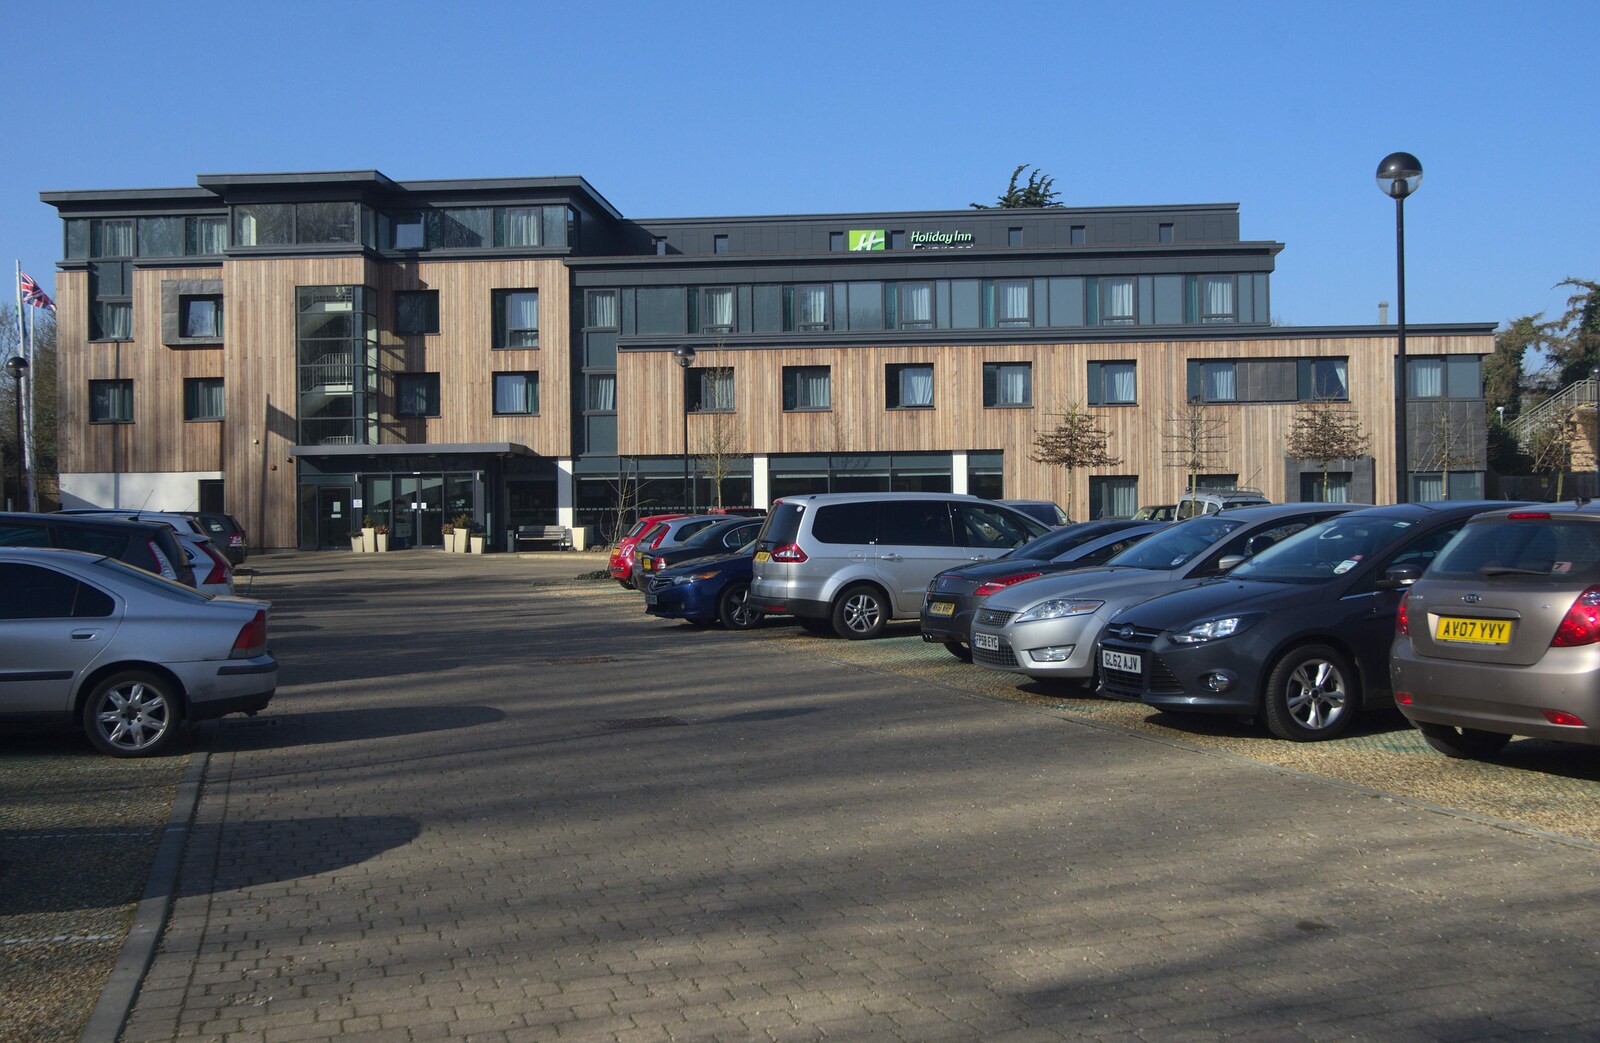 Our hotel for the night - a Holiday Inn from A Day Out at Duxford, Cambridgeshire - 9th March 2014